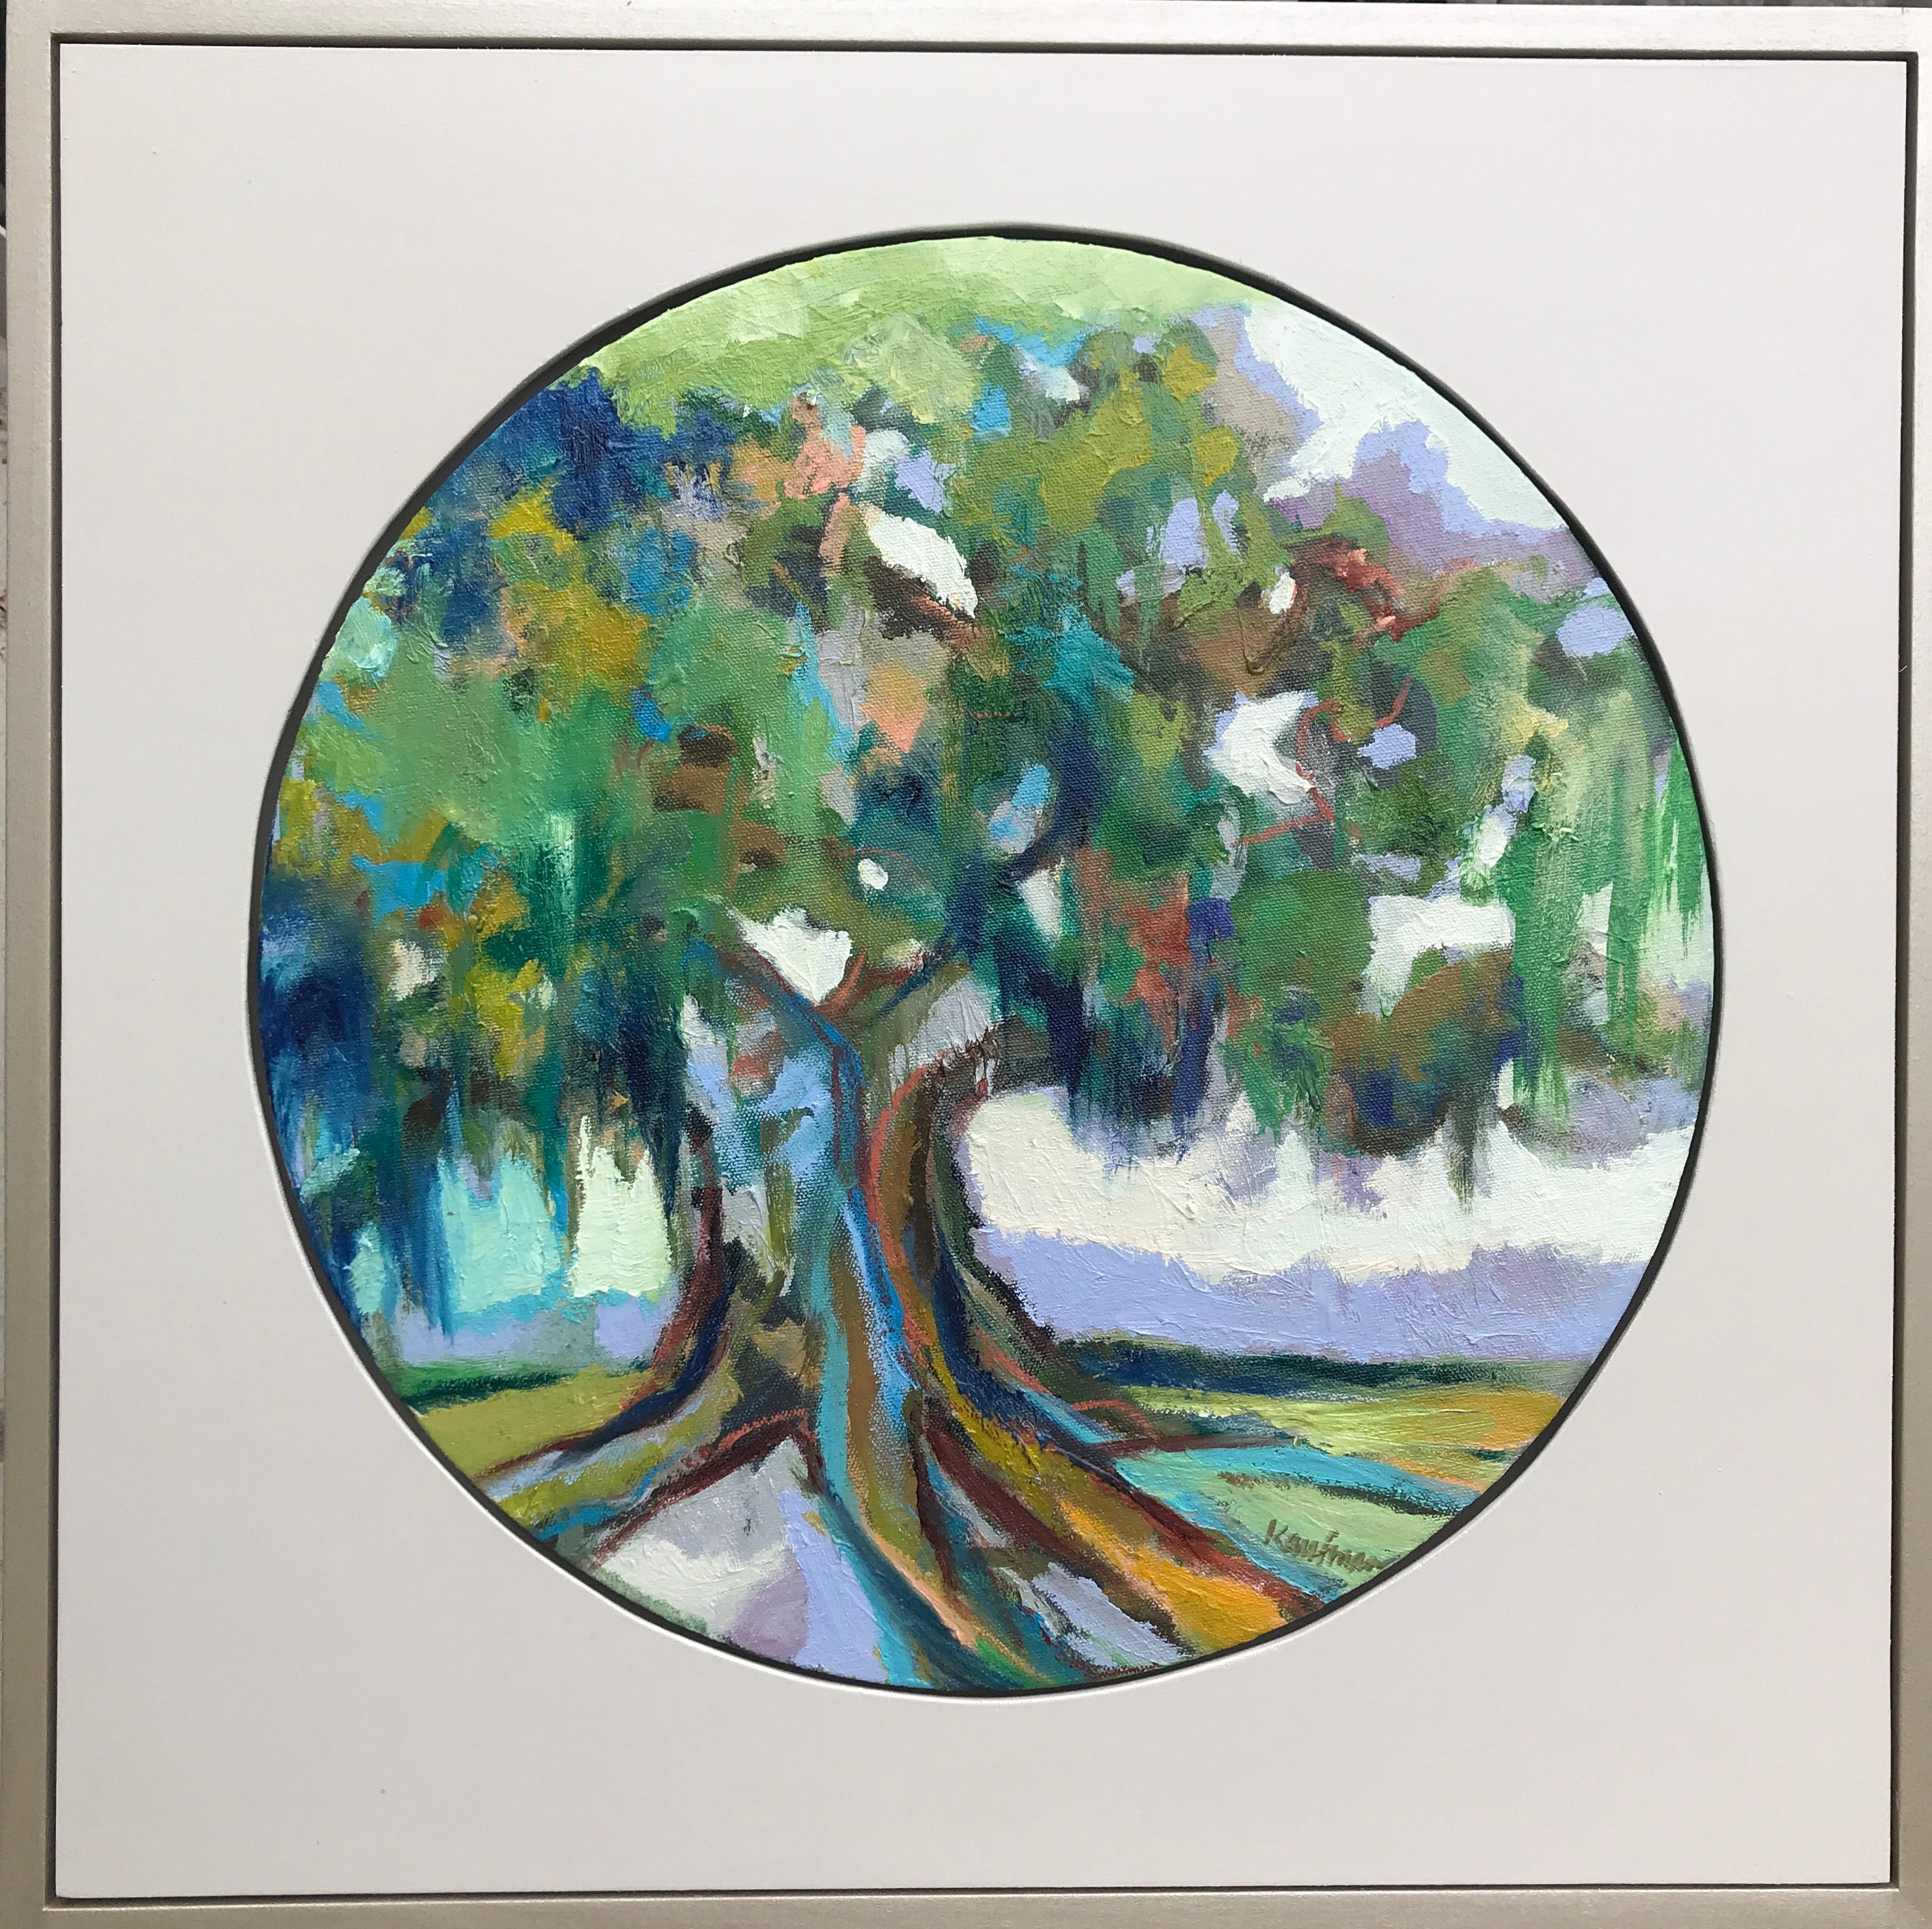 'Oak III' is a contemporary small oil and wax on canvas circular landscape painting set inside a square frame, created by American artist Kelli Kaufman in 2018. Featuring an exquisite palette made of a lovely tonality of green, purple, blue and